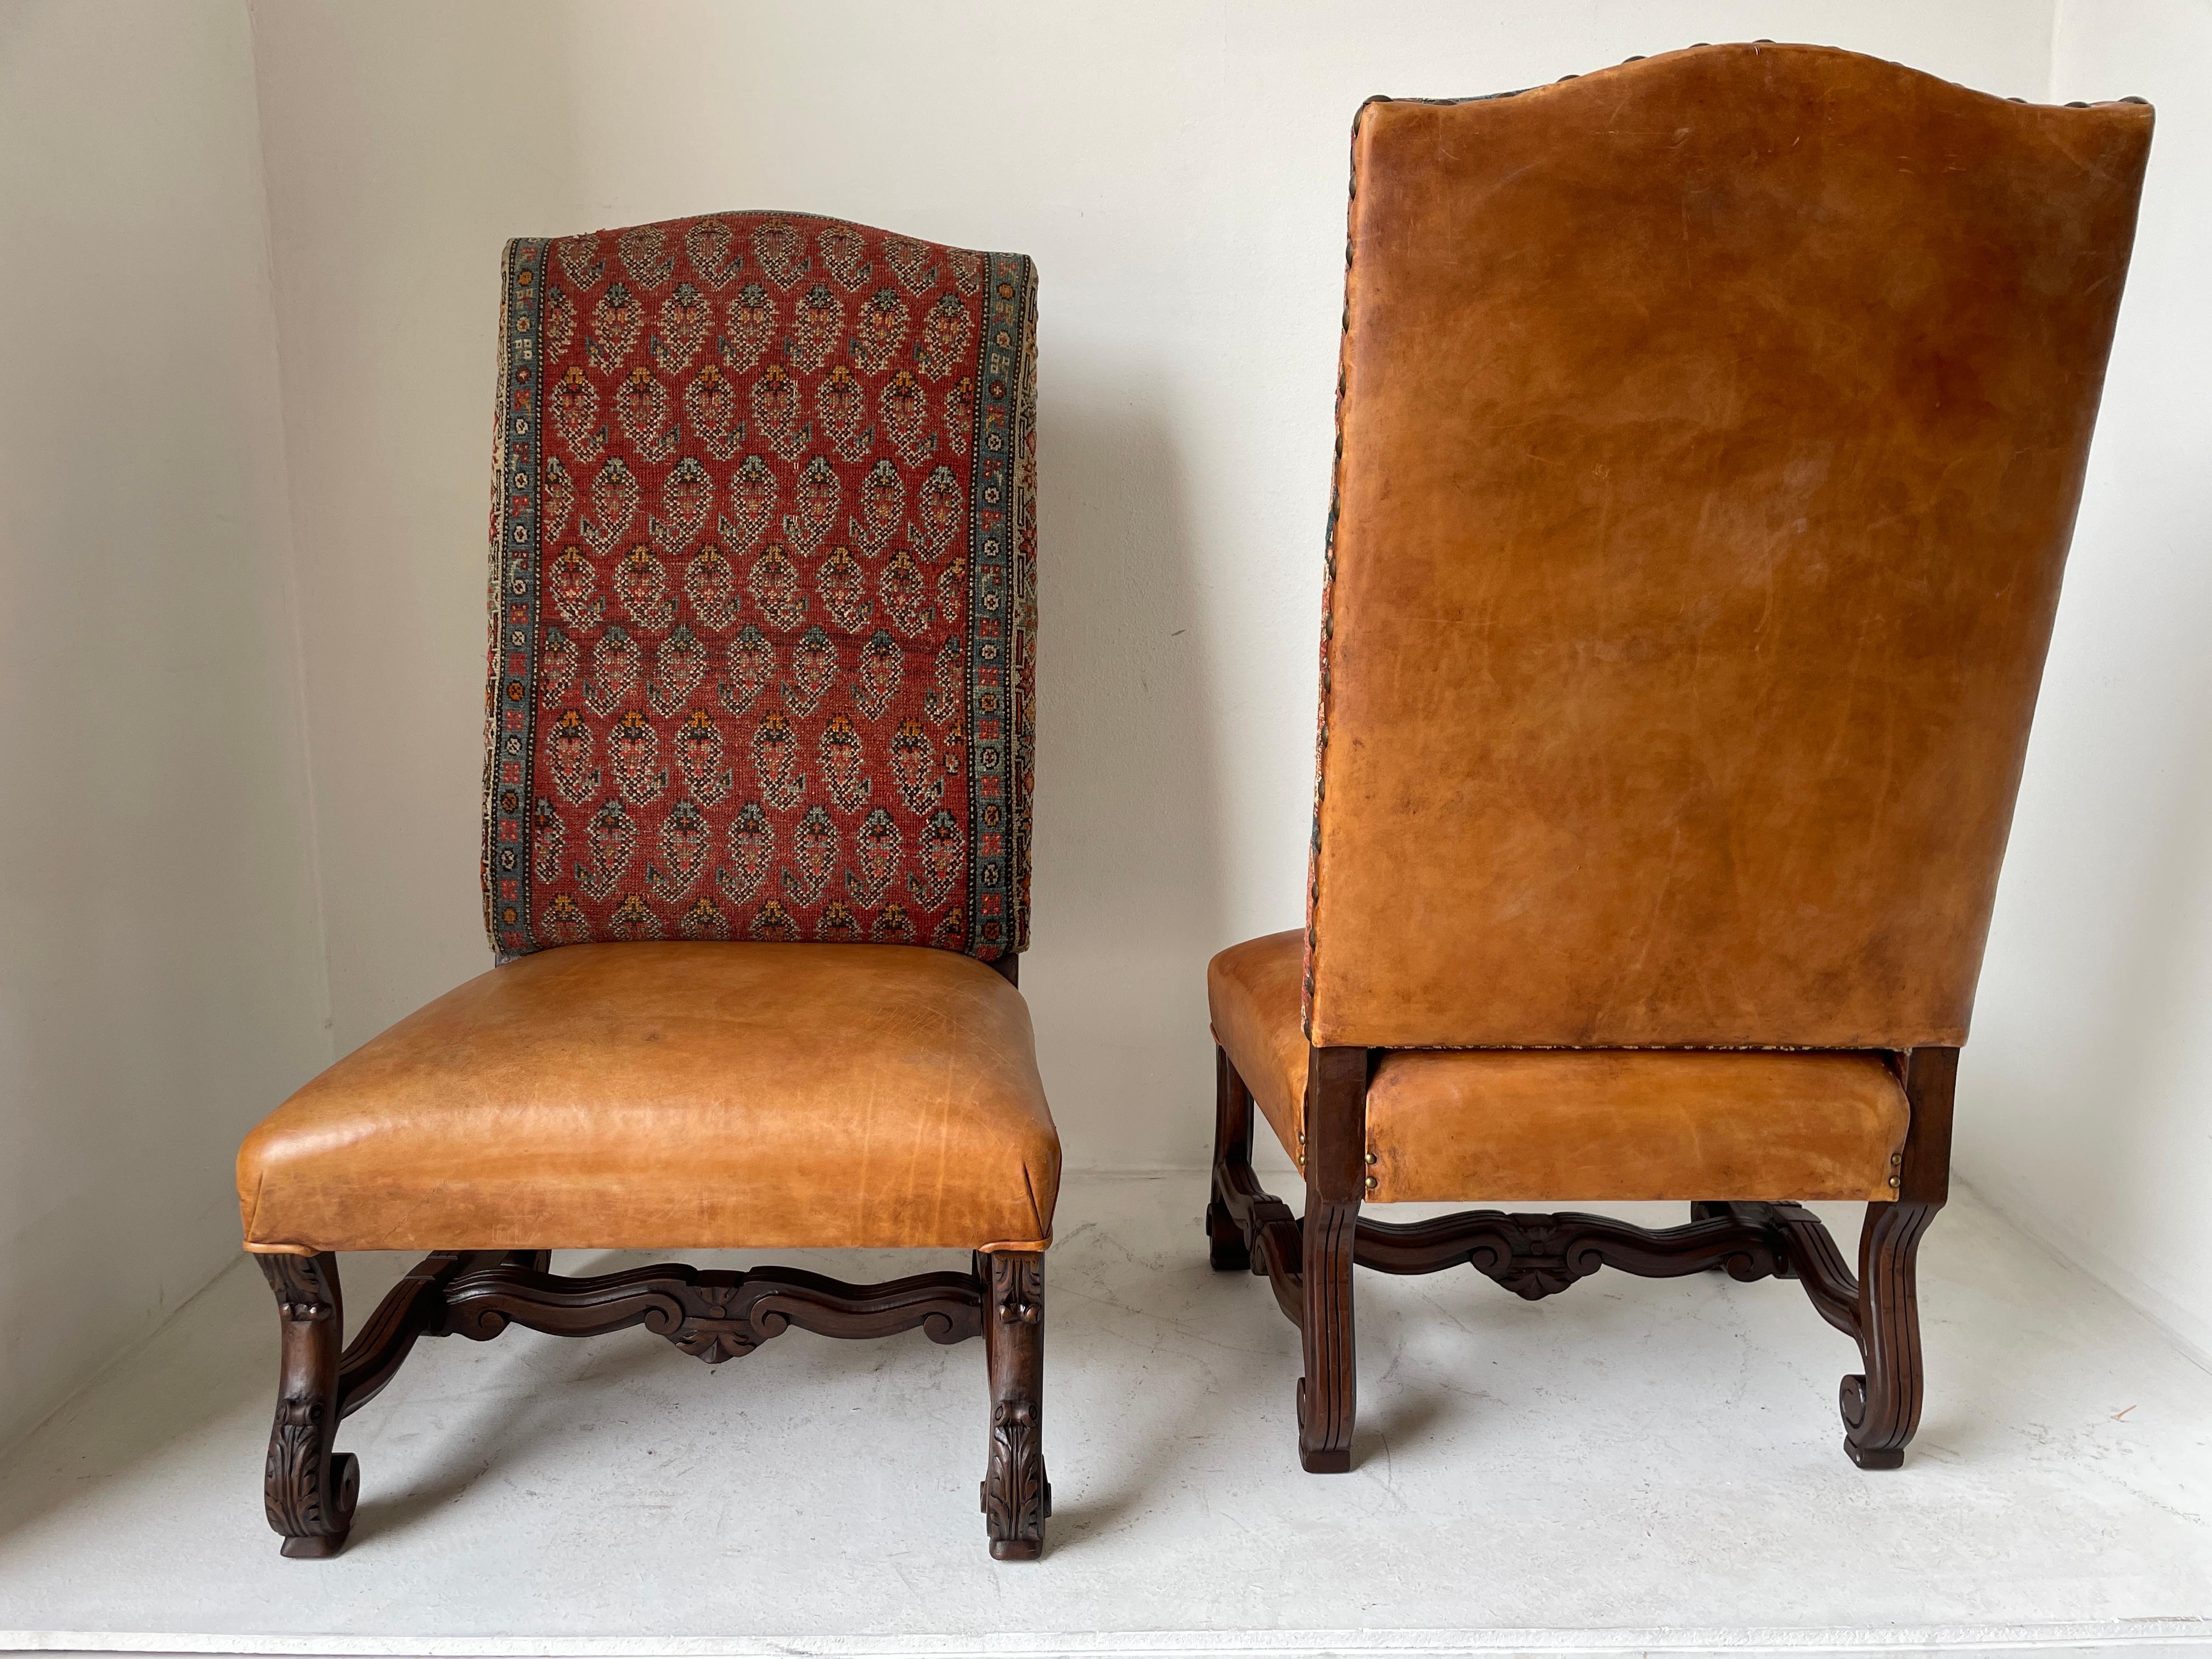 North American Spanish Colonial Walnut Hall Chairs Leather and Tapestry Covered a Pair 1940s